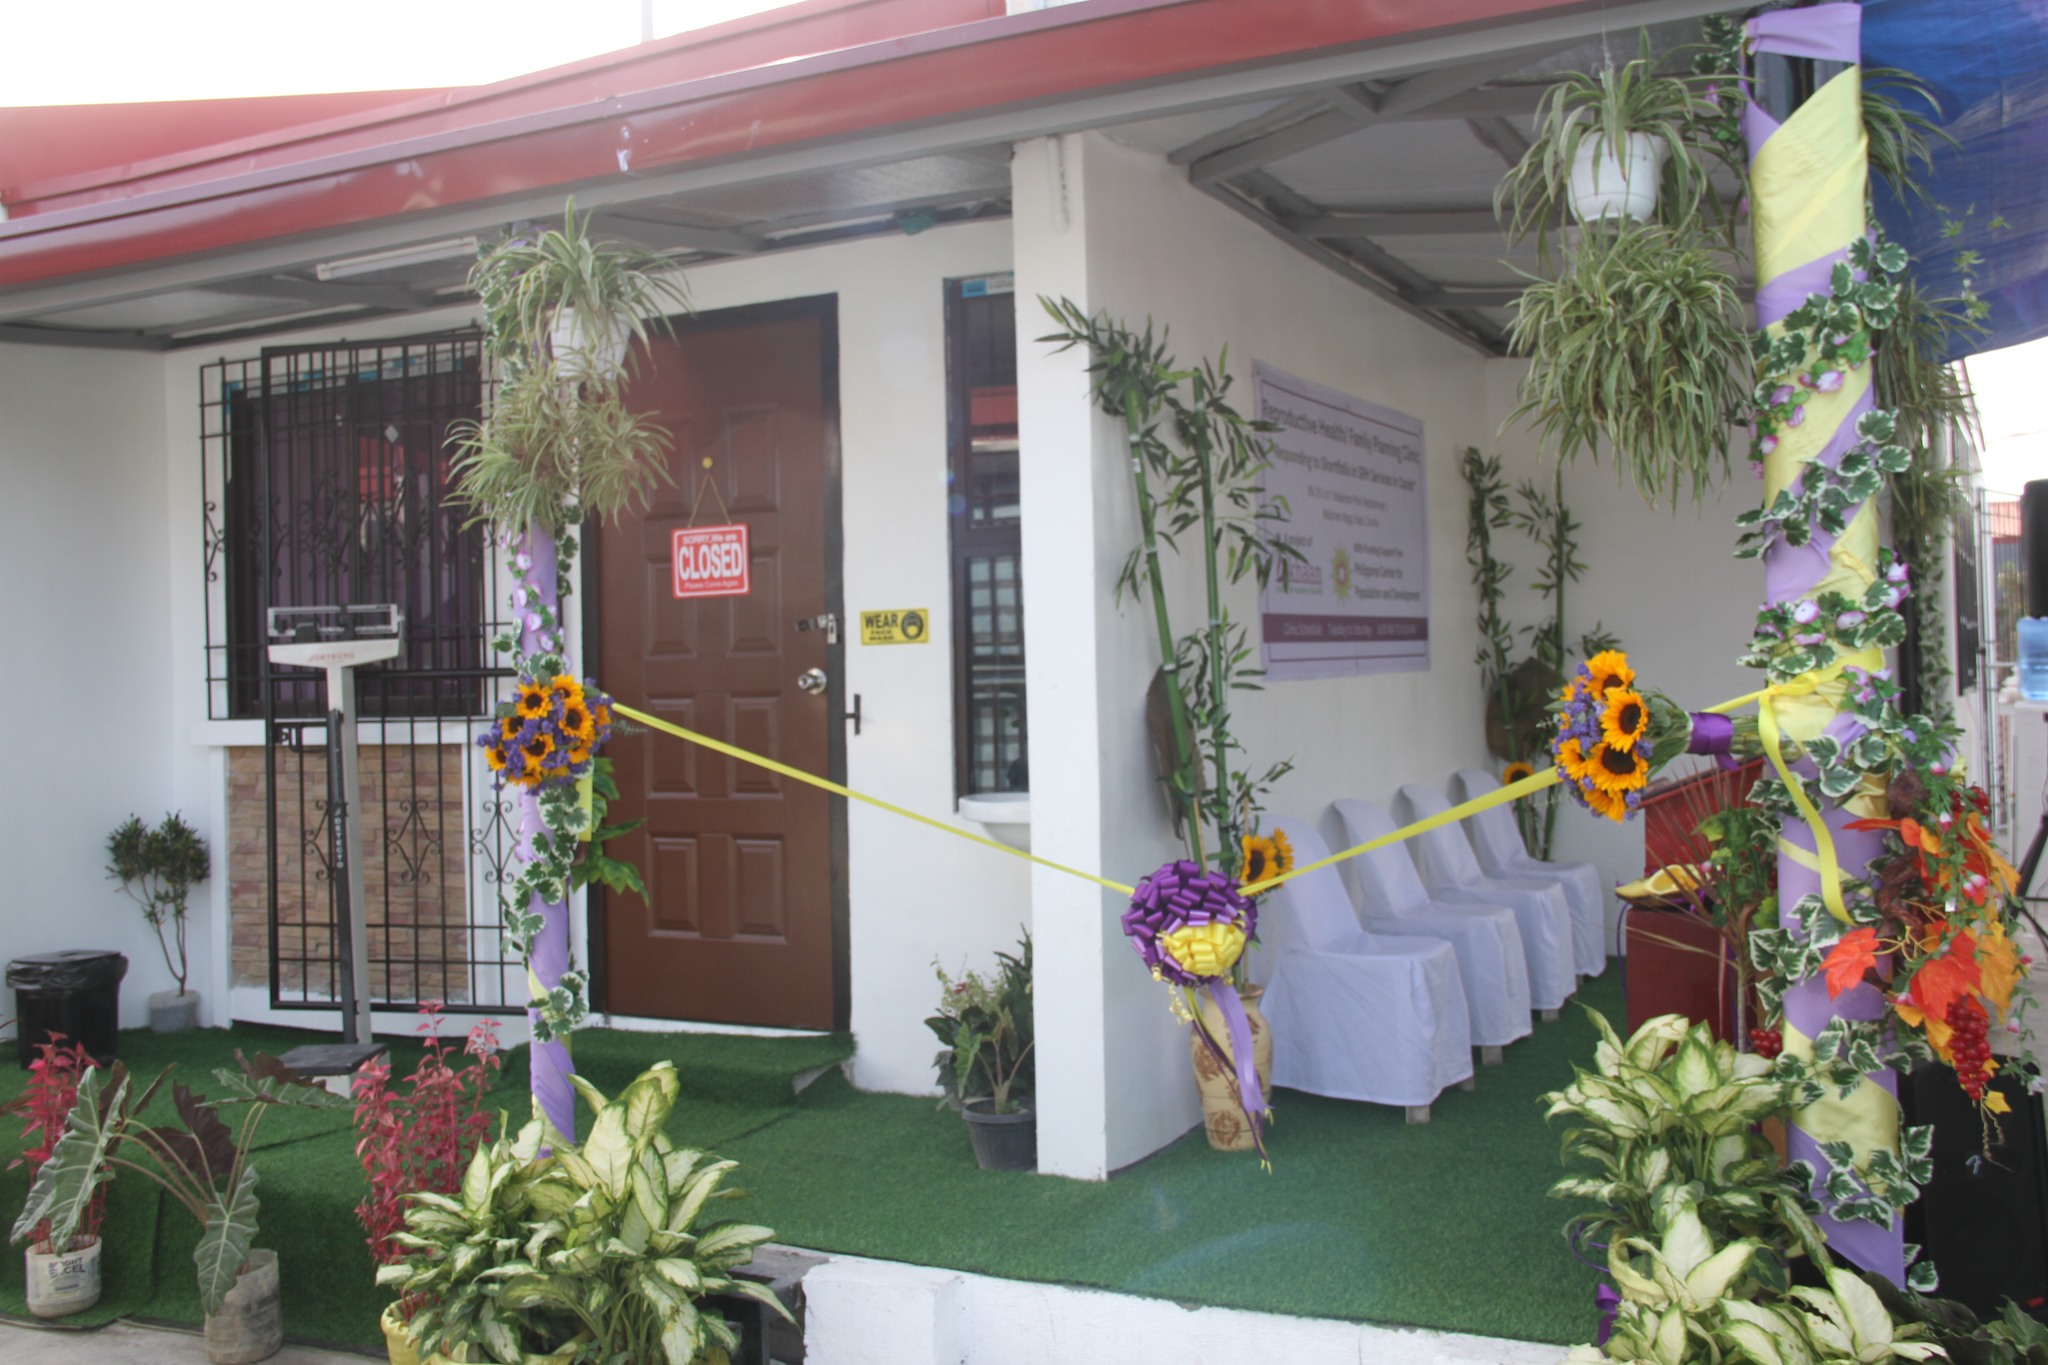 Reproductive Health and Family Planning Clinic, Malainen, Naic, Cavite